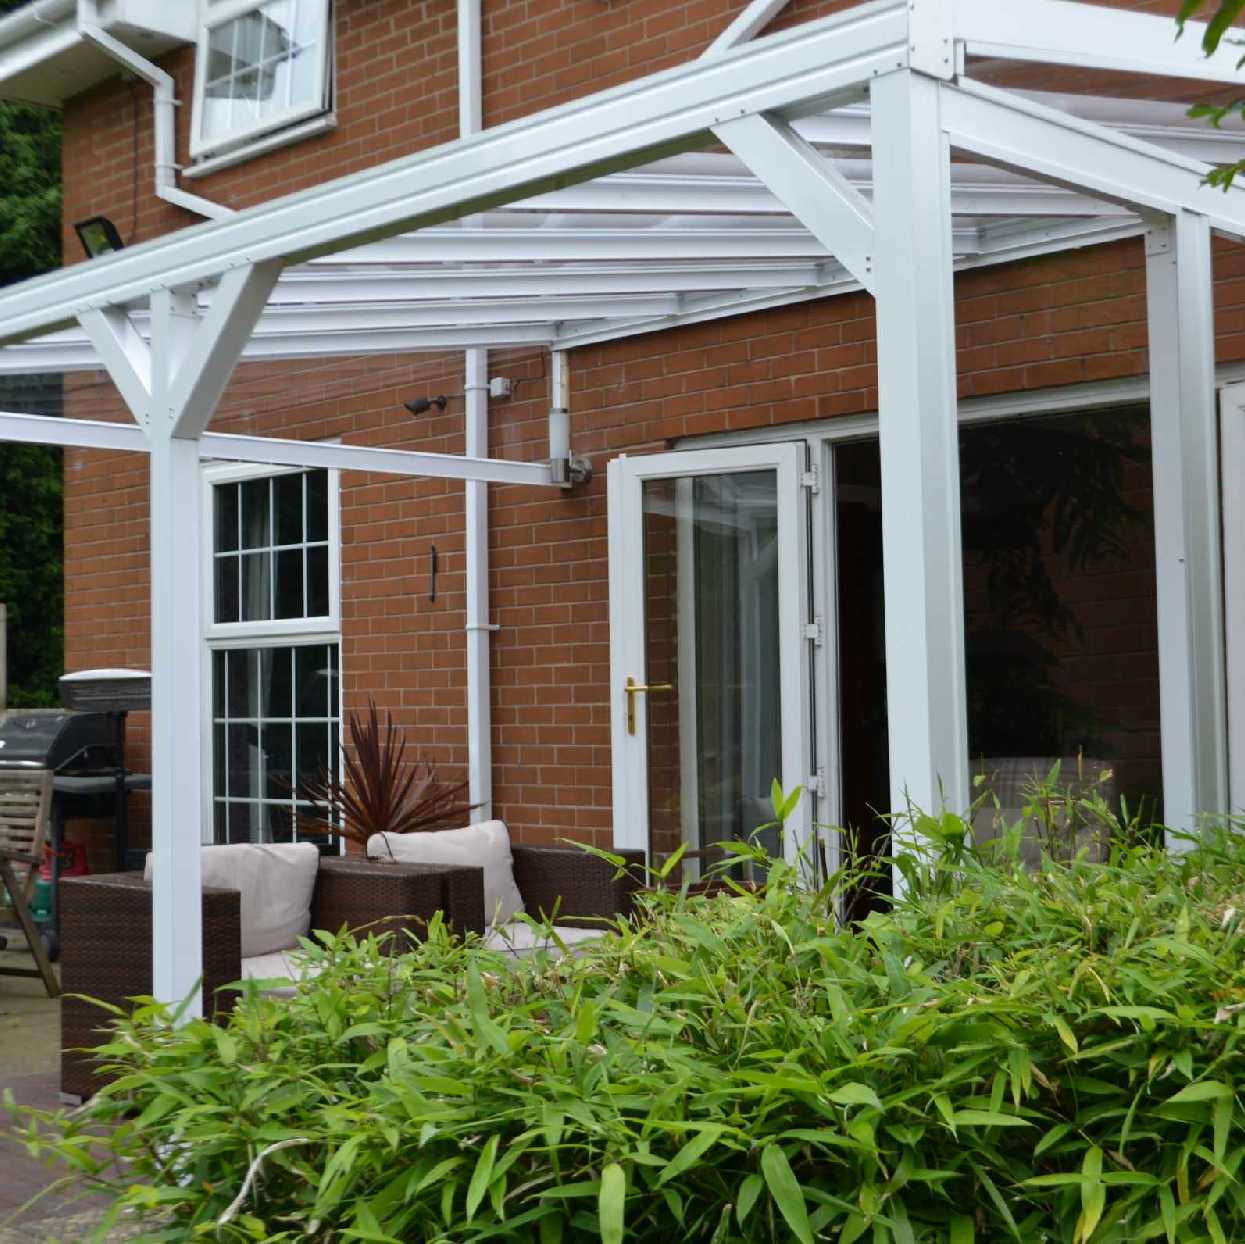 Omega Smart Lean-To Canopy, White with 6mm Glass Clear Plate Polycarbonate Glazing - 4.9m (W) x 3.5m (P), (3) Supporting Posts from Omega Build